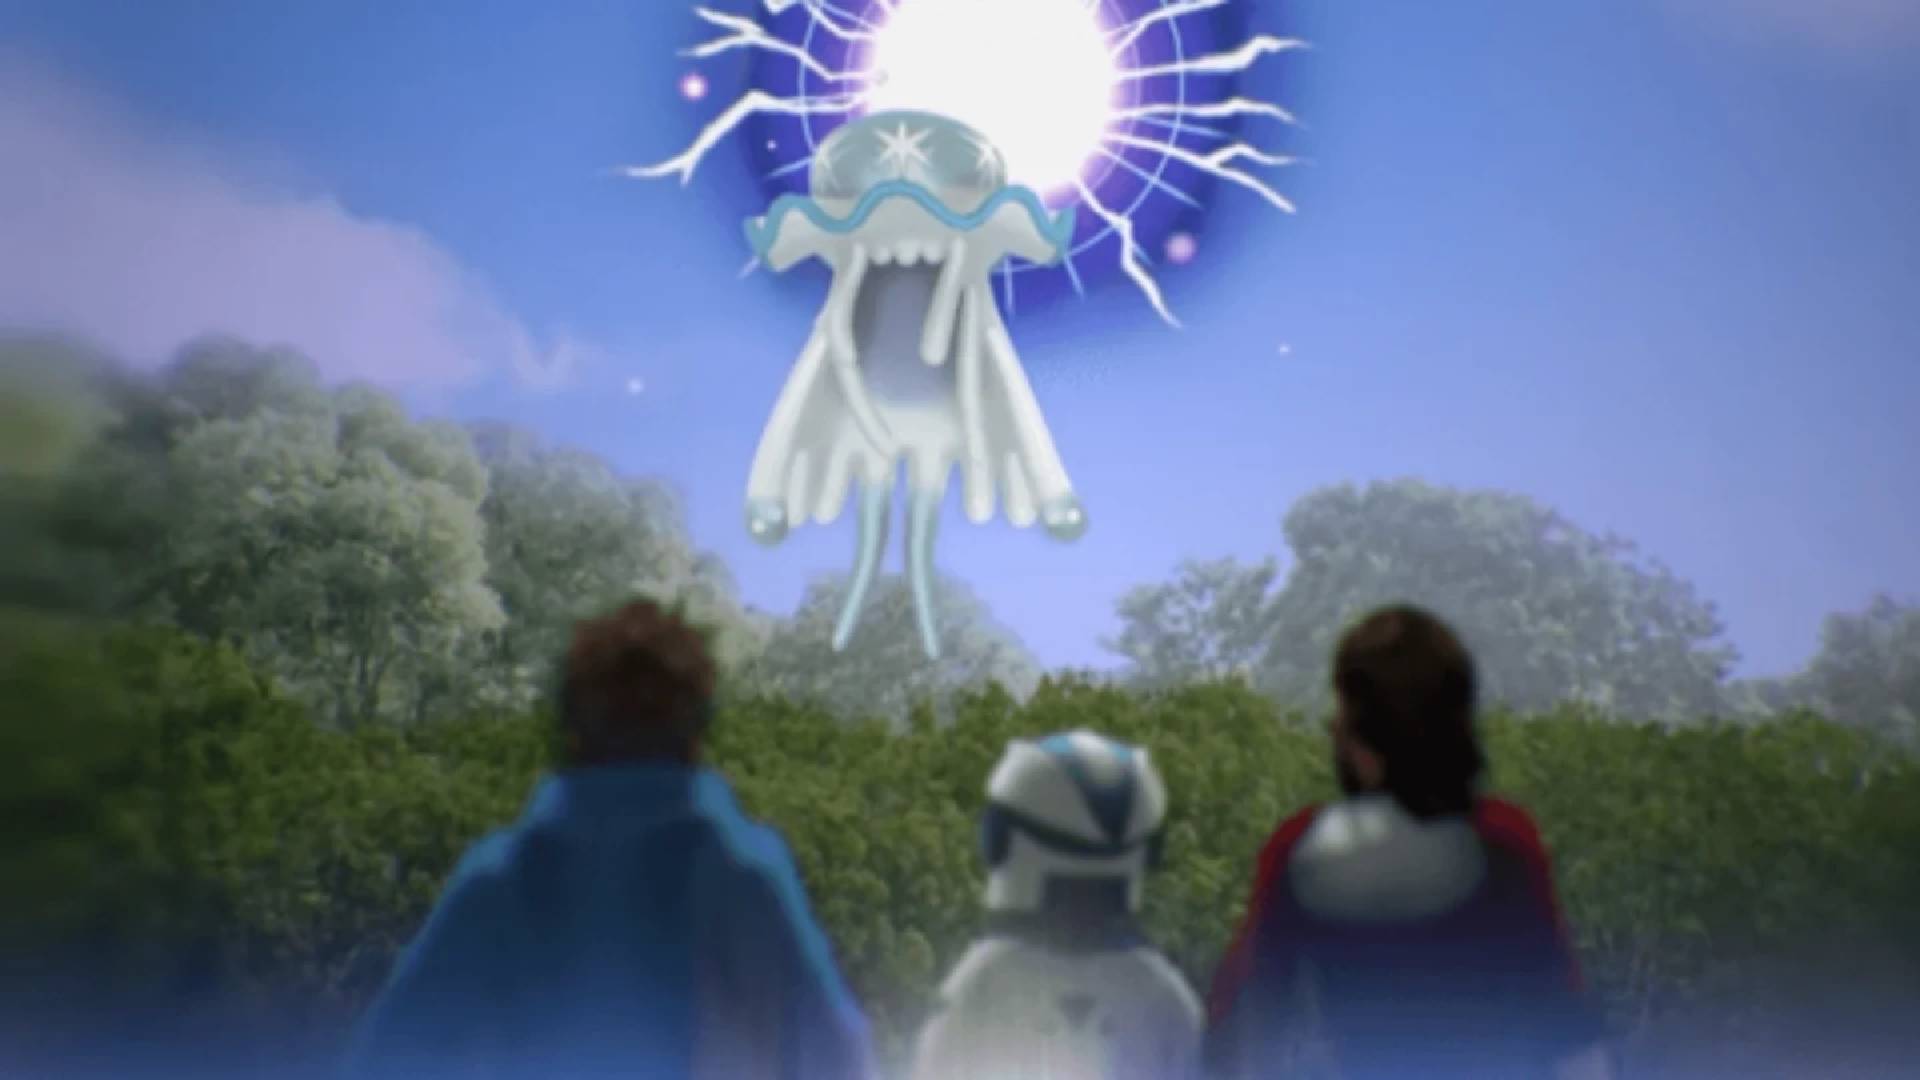 Pokemon Go Ultra Beasts: the jellyfish Pokemon Nihilego appears through a wormhole in front of several Pokemon trainers